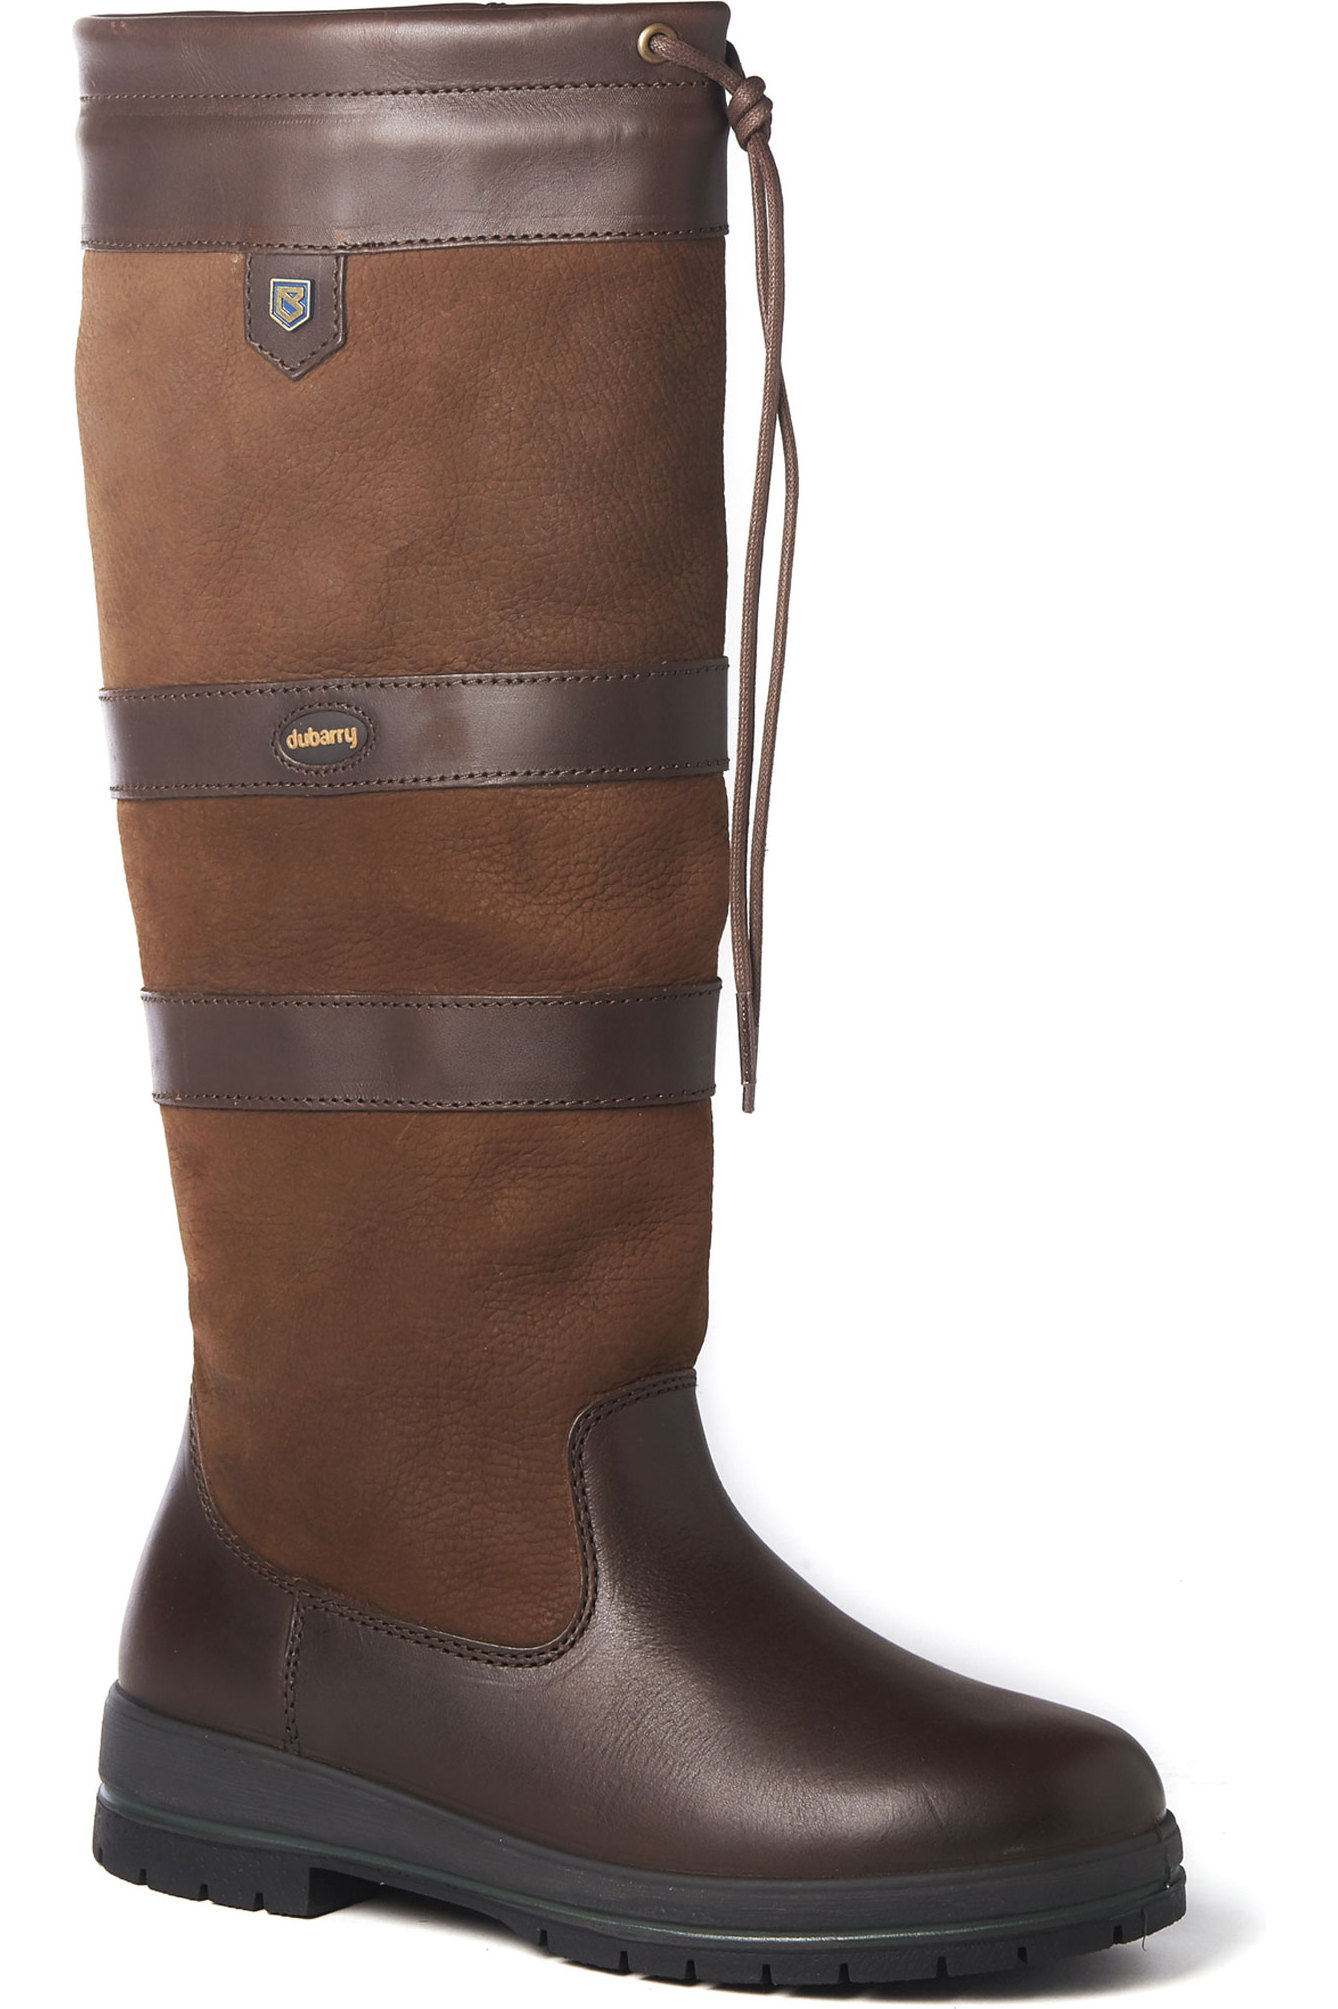 Extra Fit Dubarry Galway extraweit Black/Brown 3931-12 